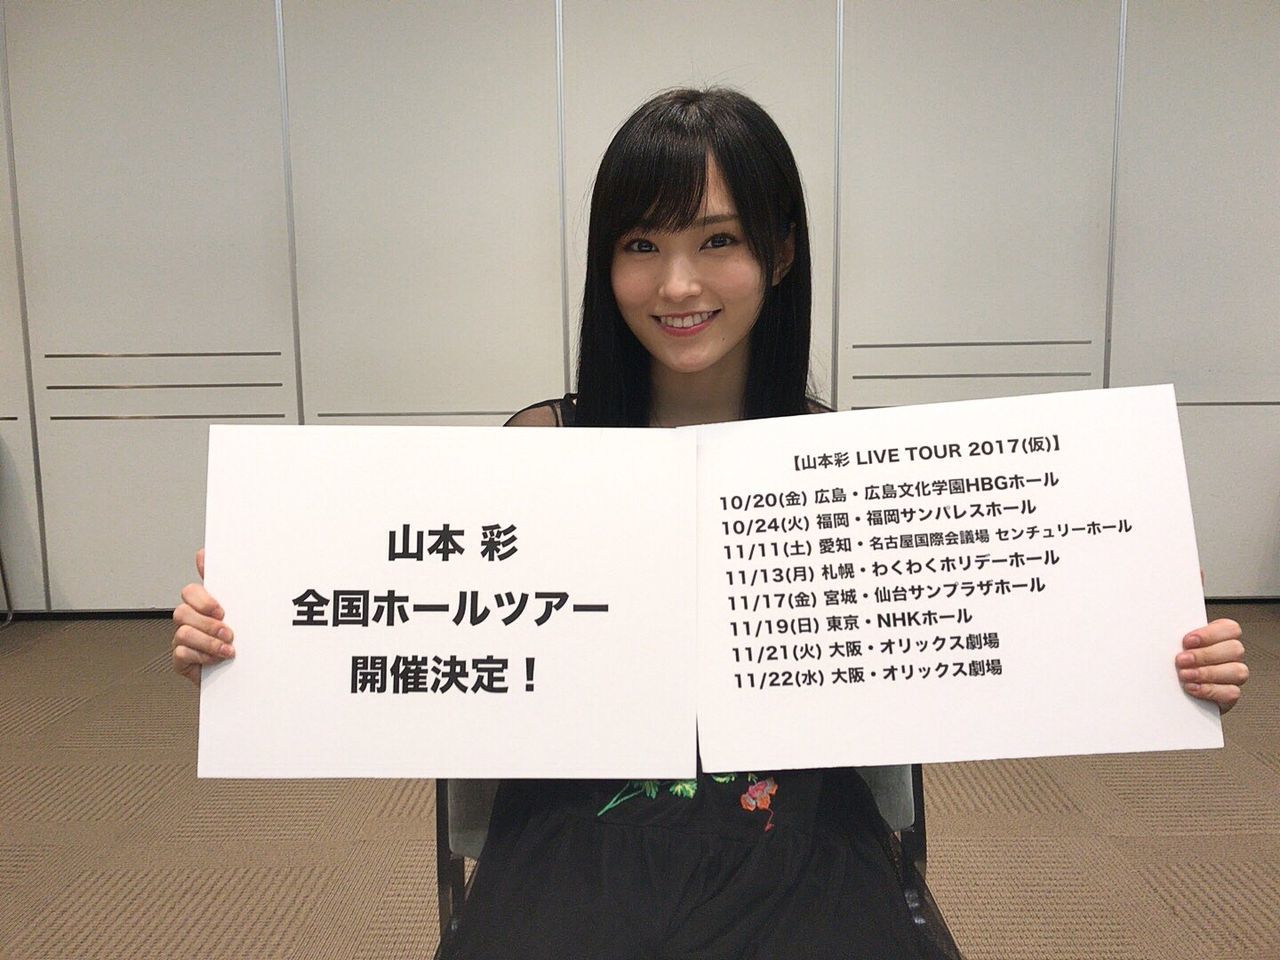 【NMB48】 山本彩 全国ホールツアー開催決定！7都市で8公演 